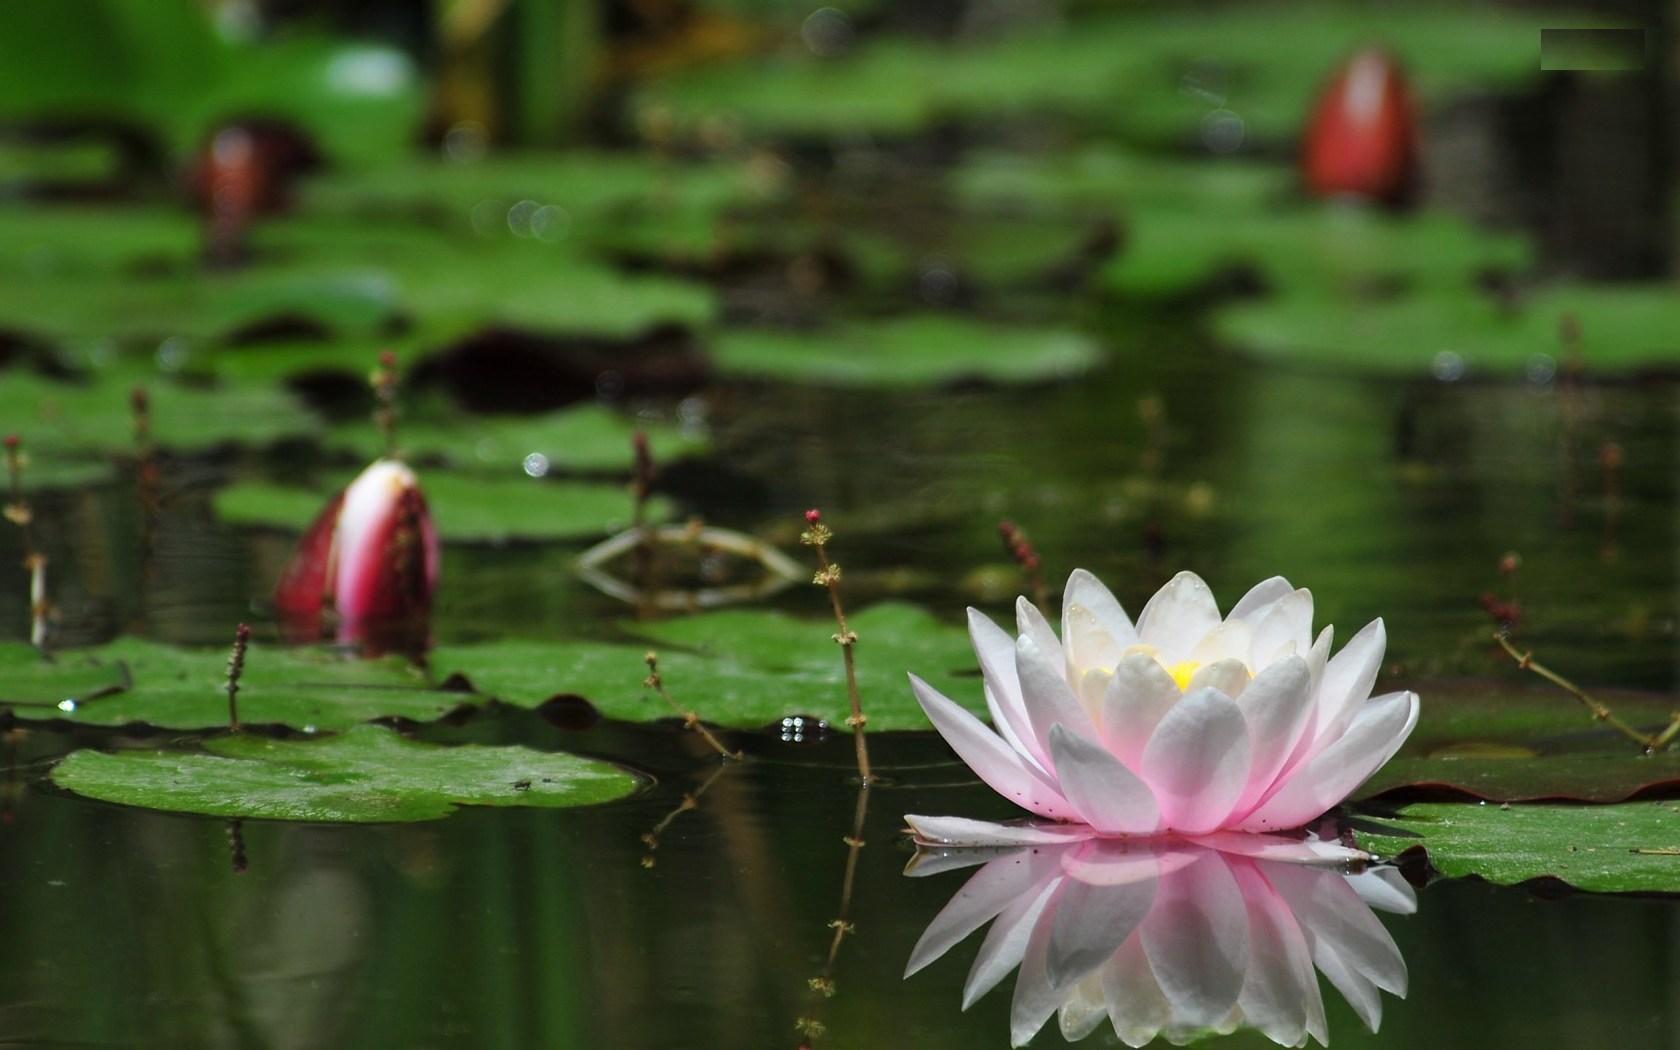 Water Lily Flower HD Wallpapers | Water Lily Flowers Images | Cool ...